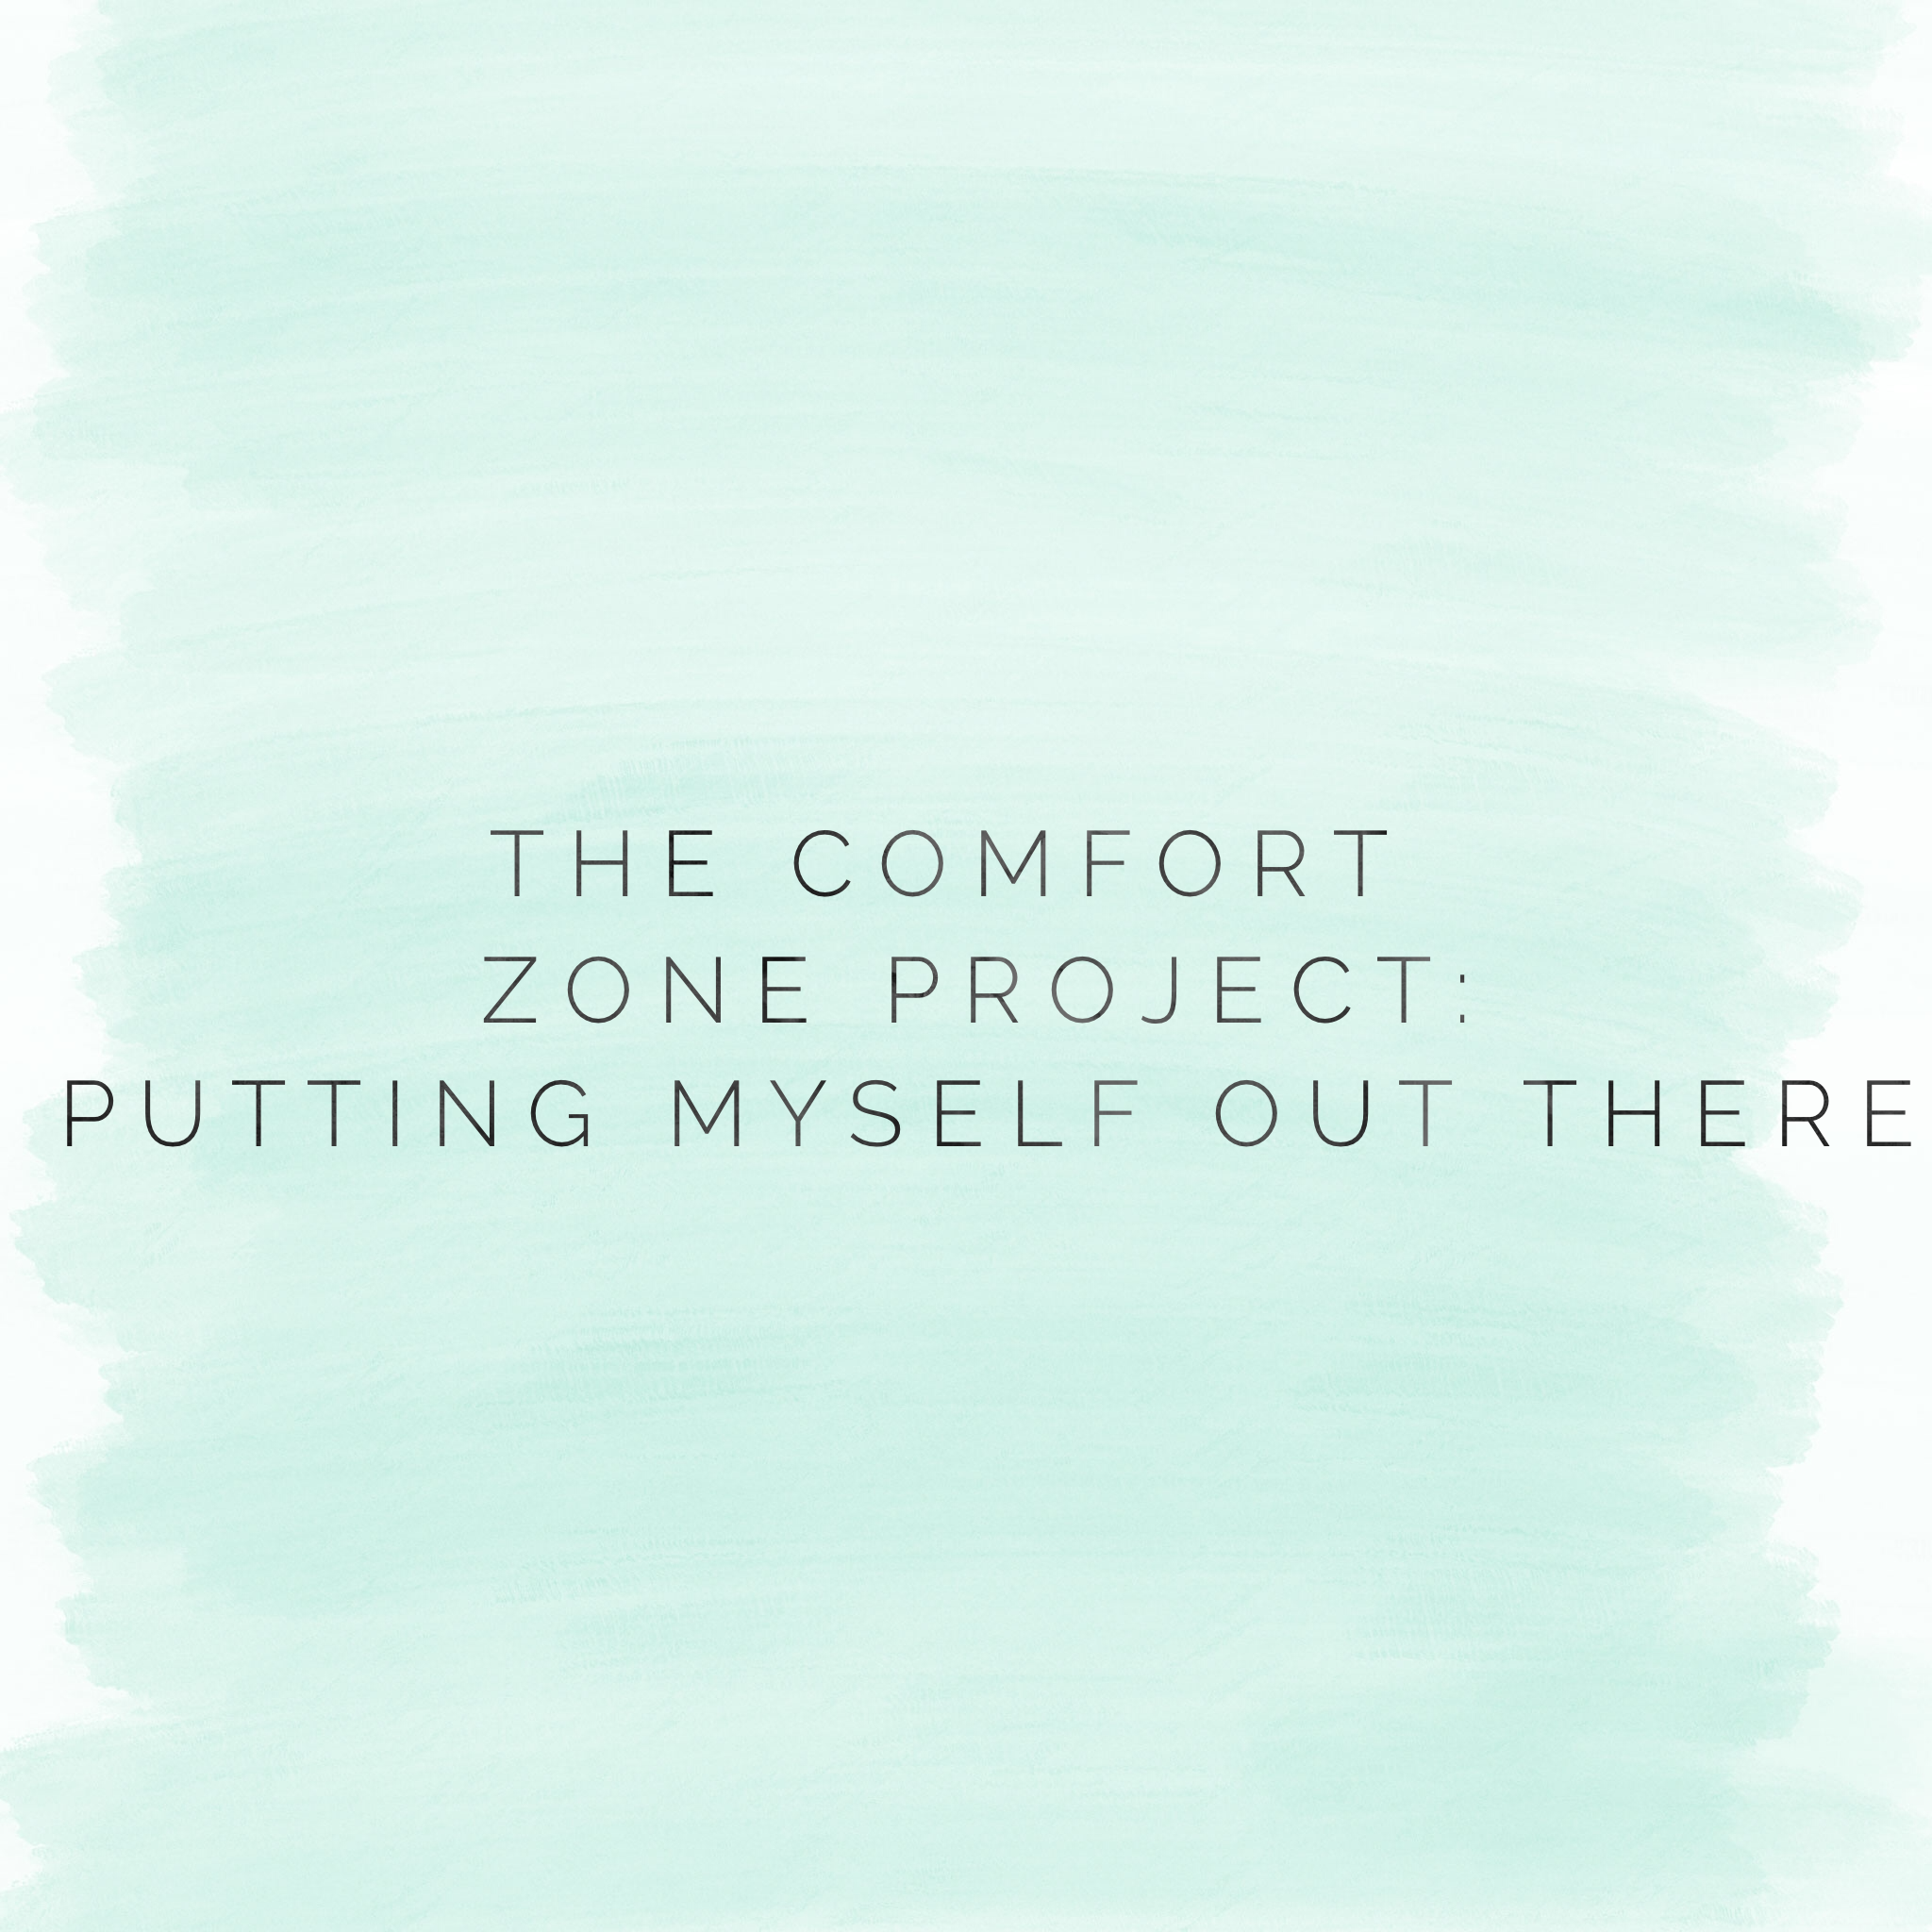 The Comfort Zone Project: Putting Myself Out There